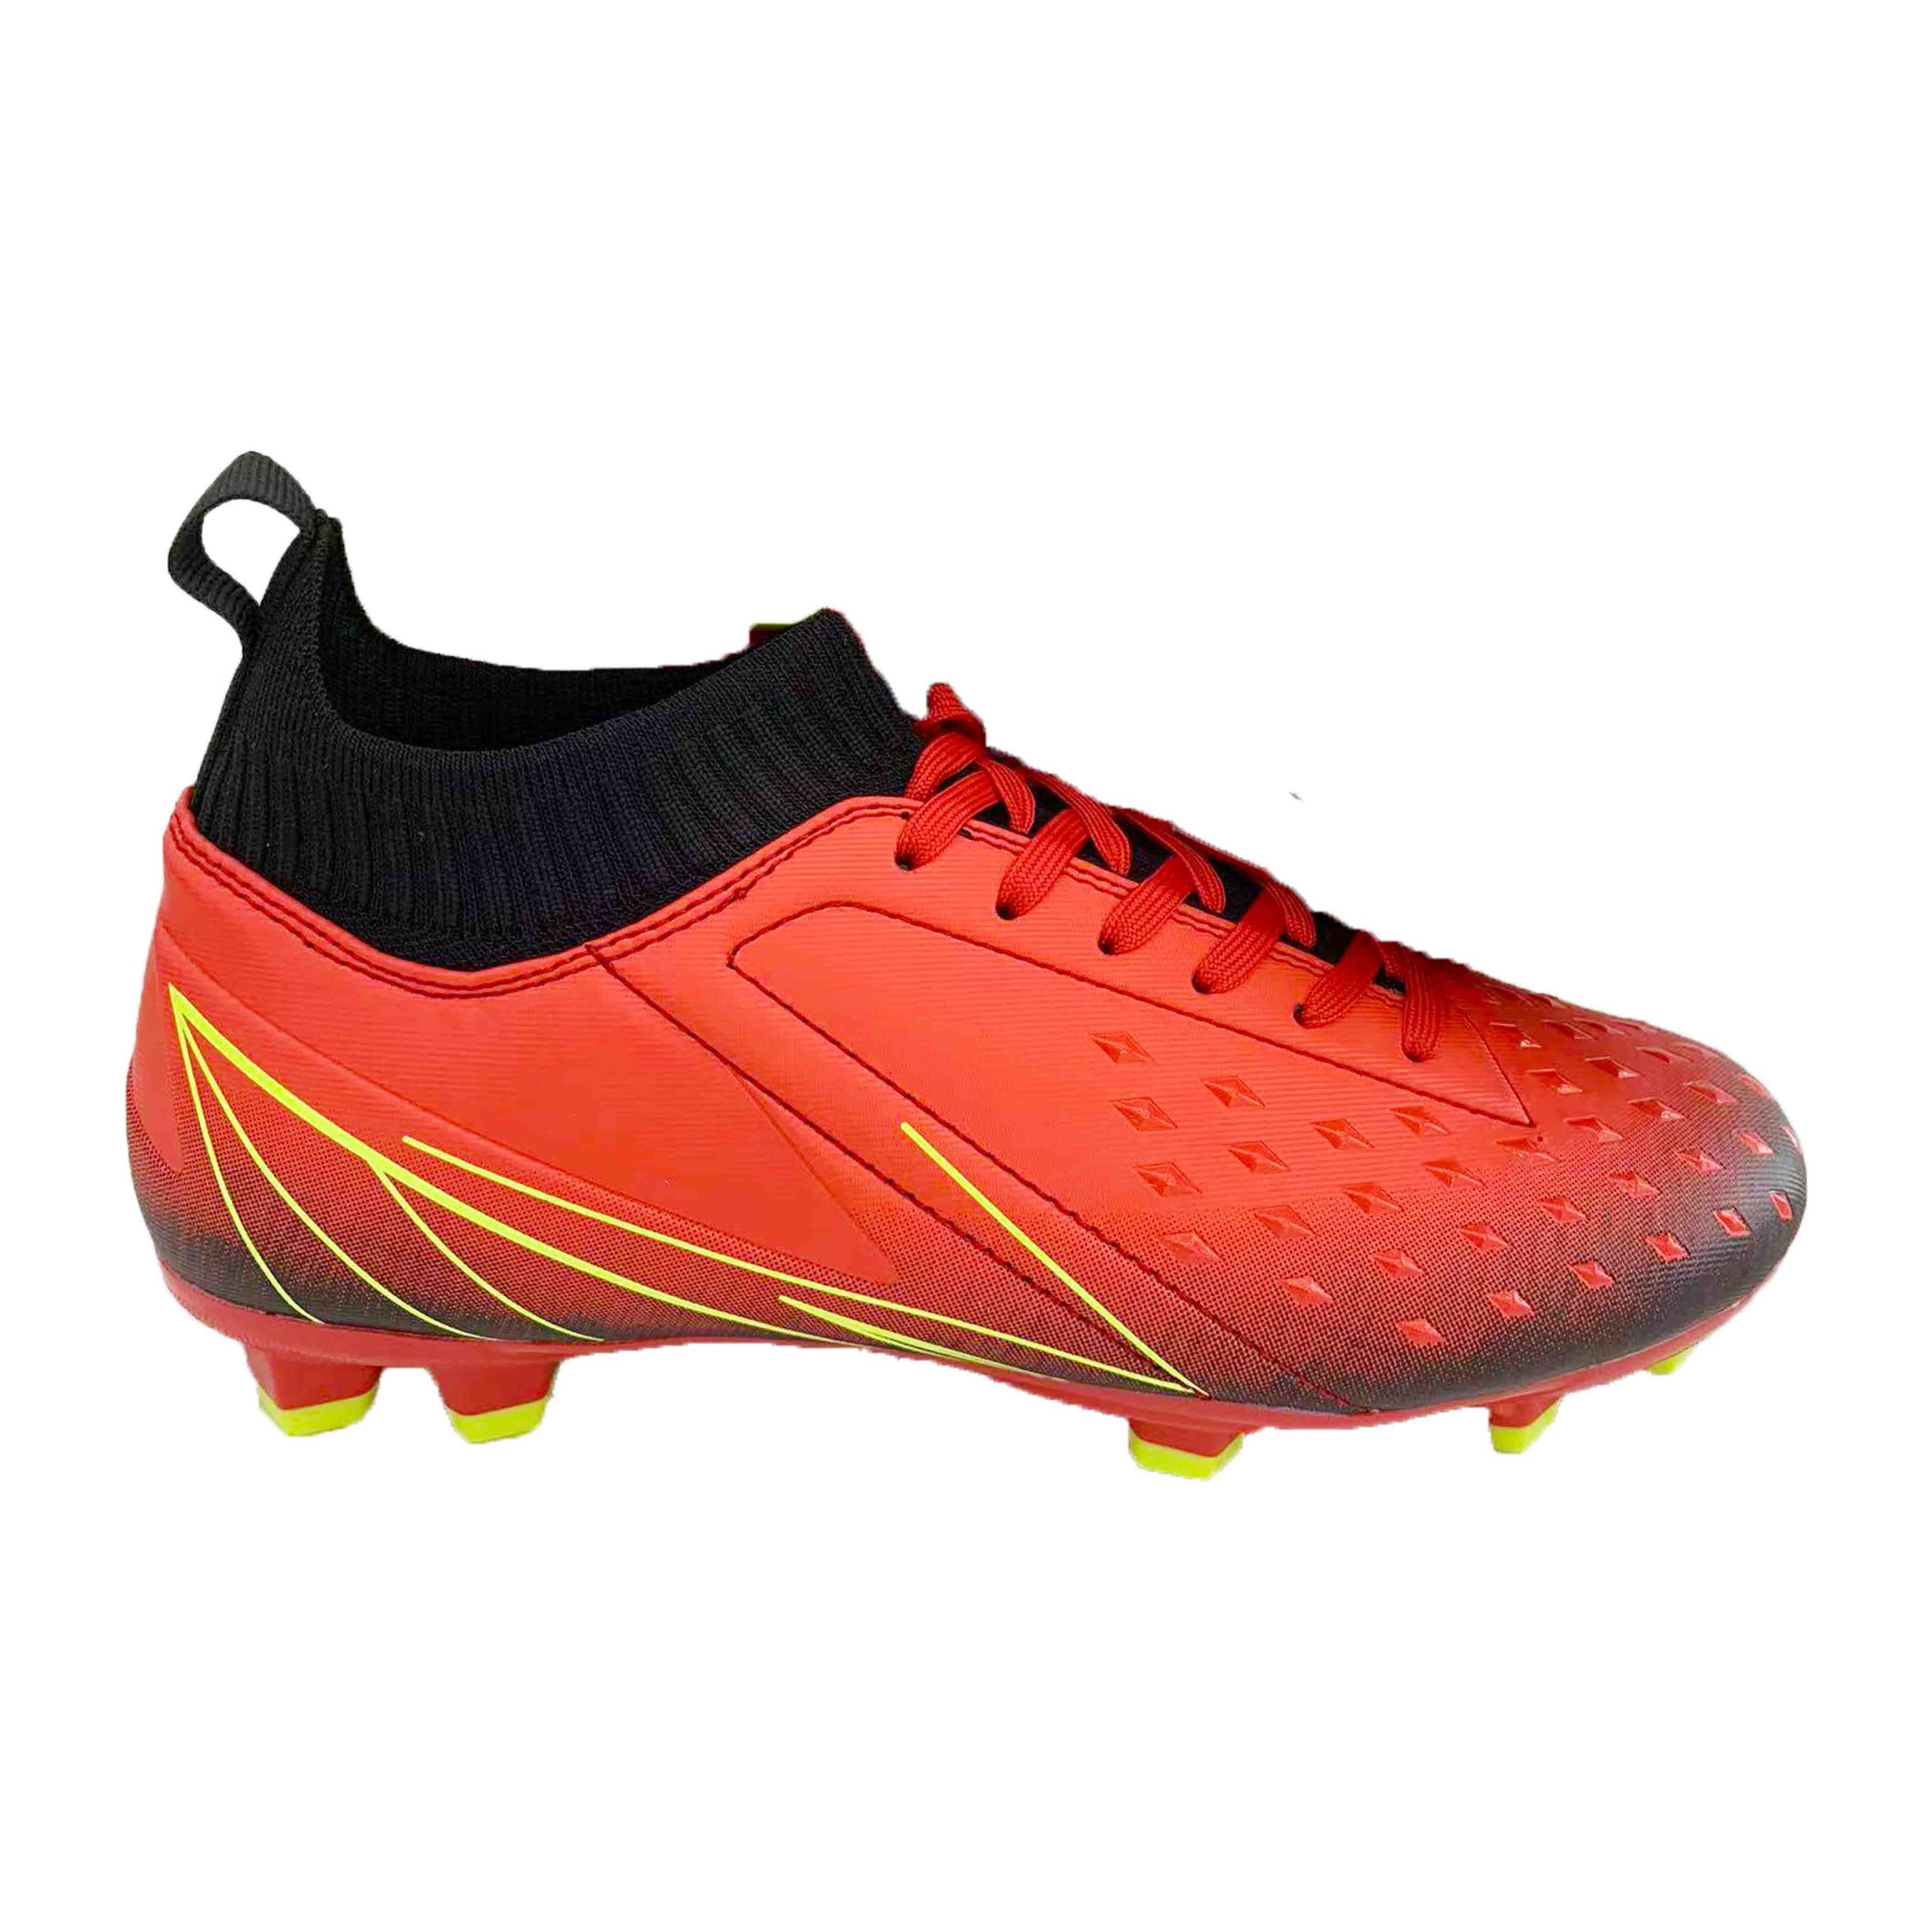 First Sport | Football Boots Jnr. (22185-E) Red | Black - Sports & Games